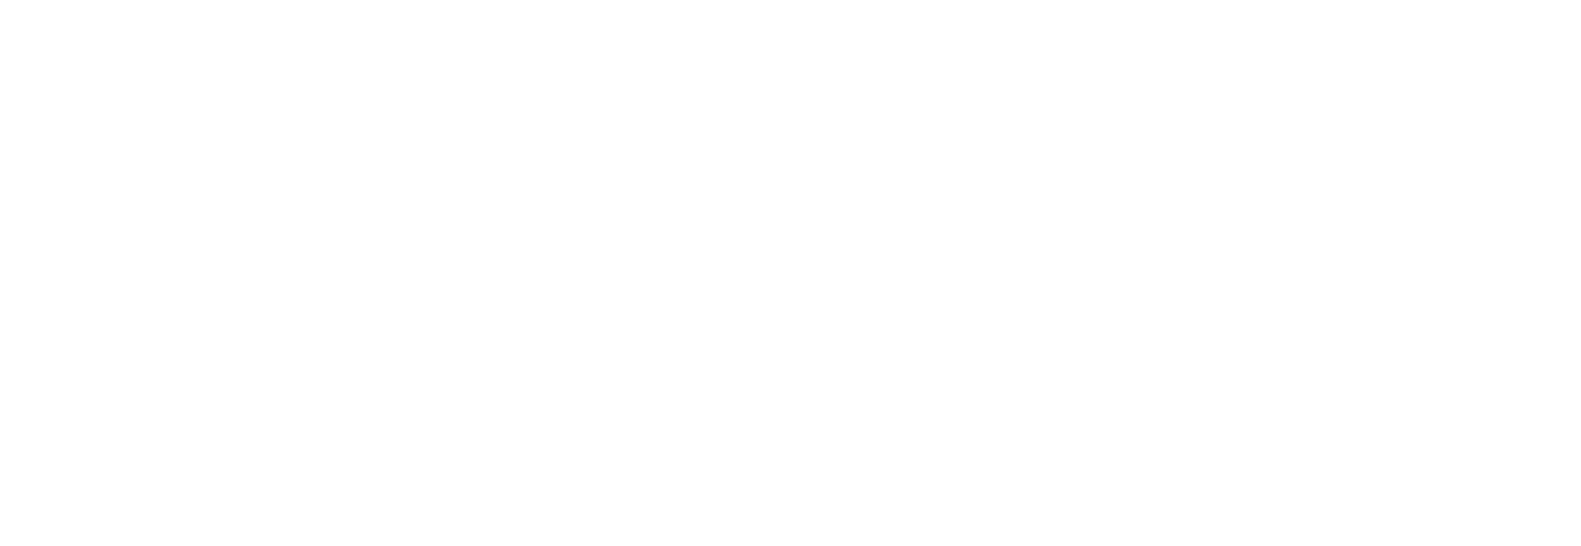 Ricoh Company logo large for dark backgrounds (transparent PNG)